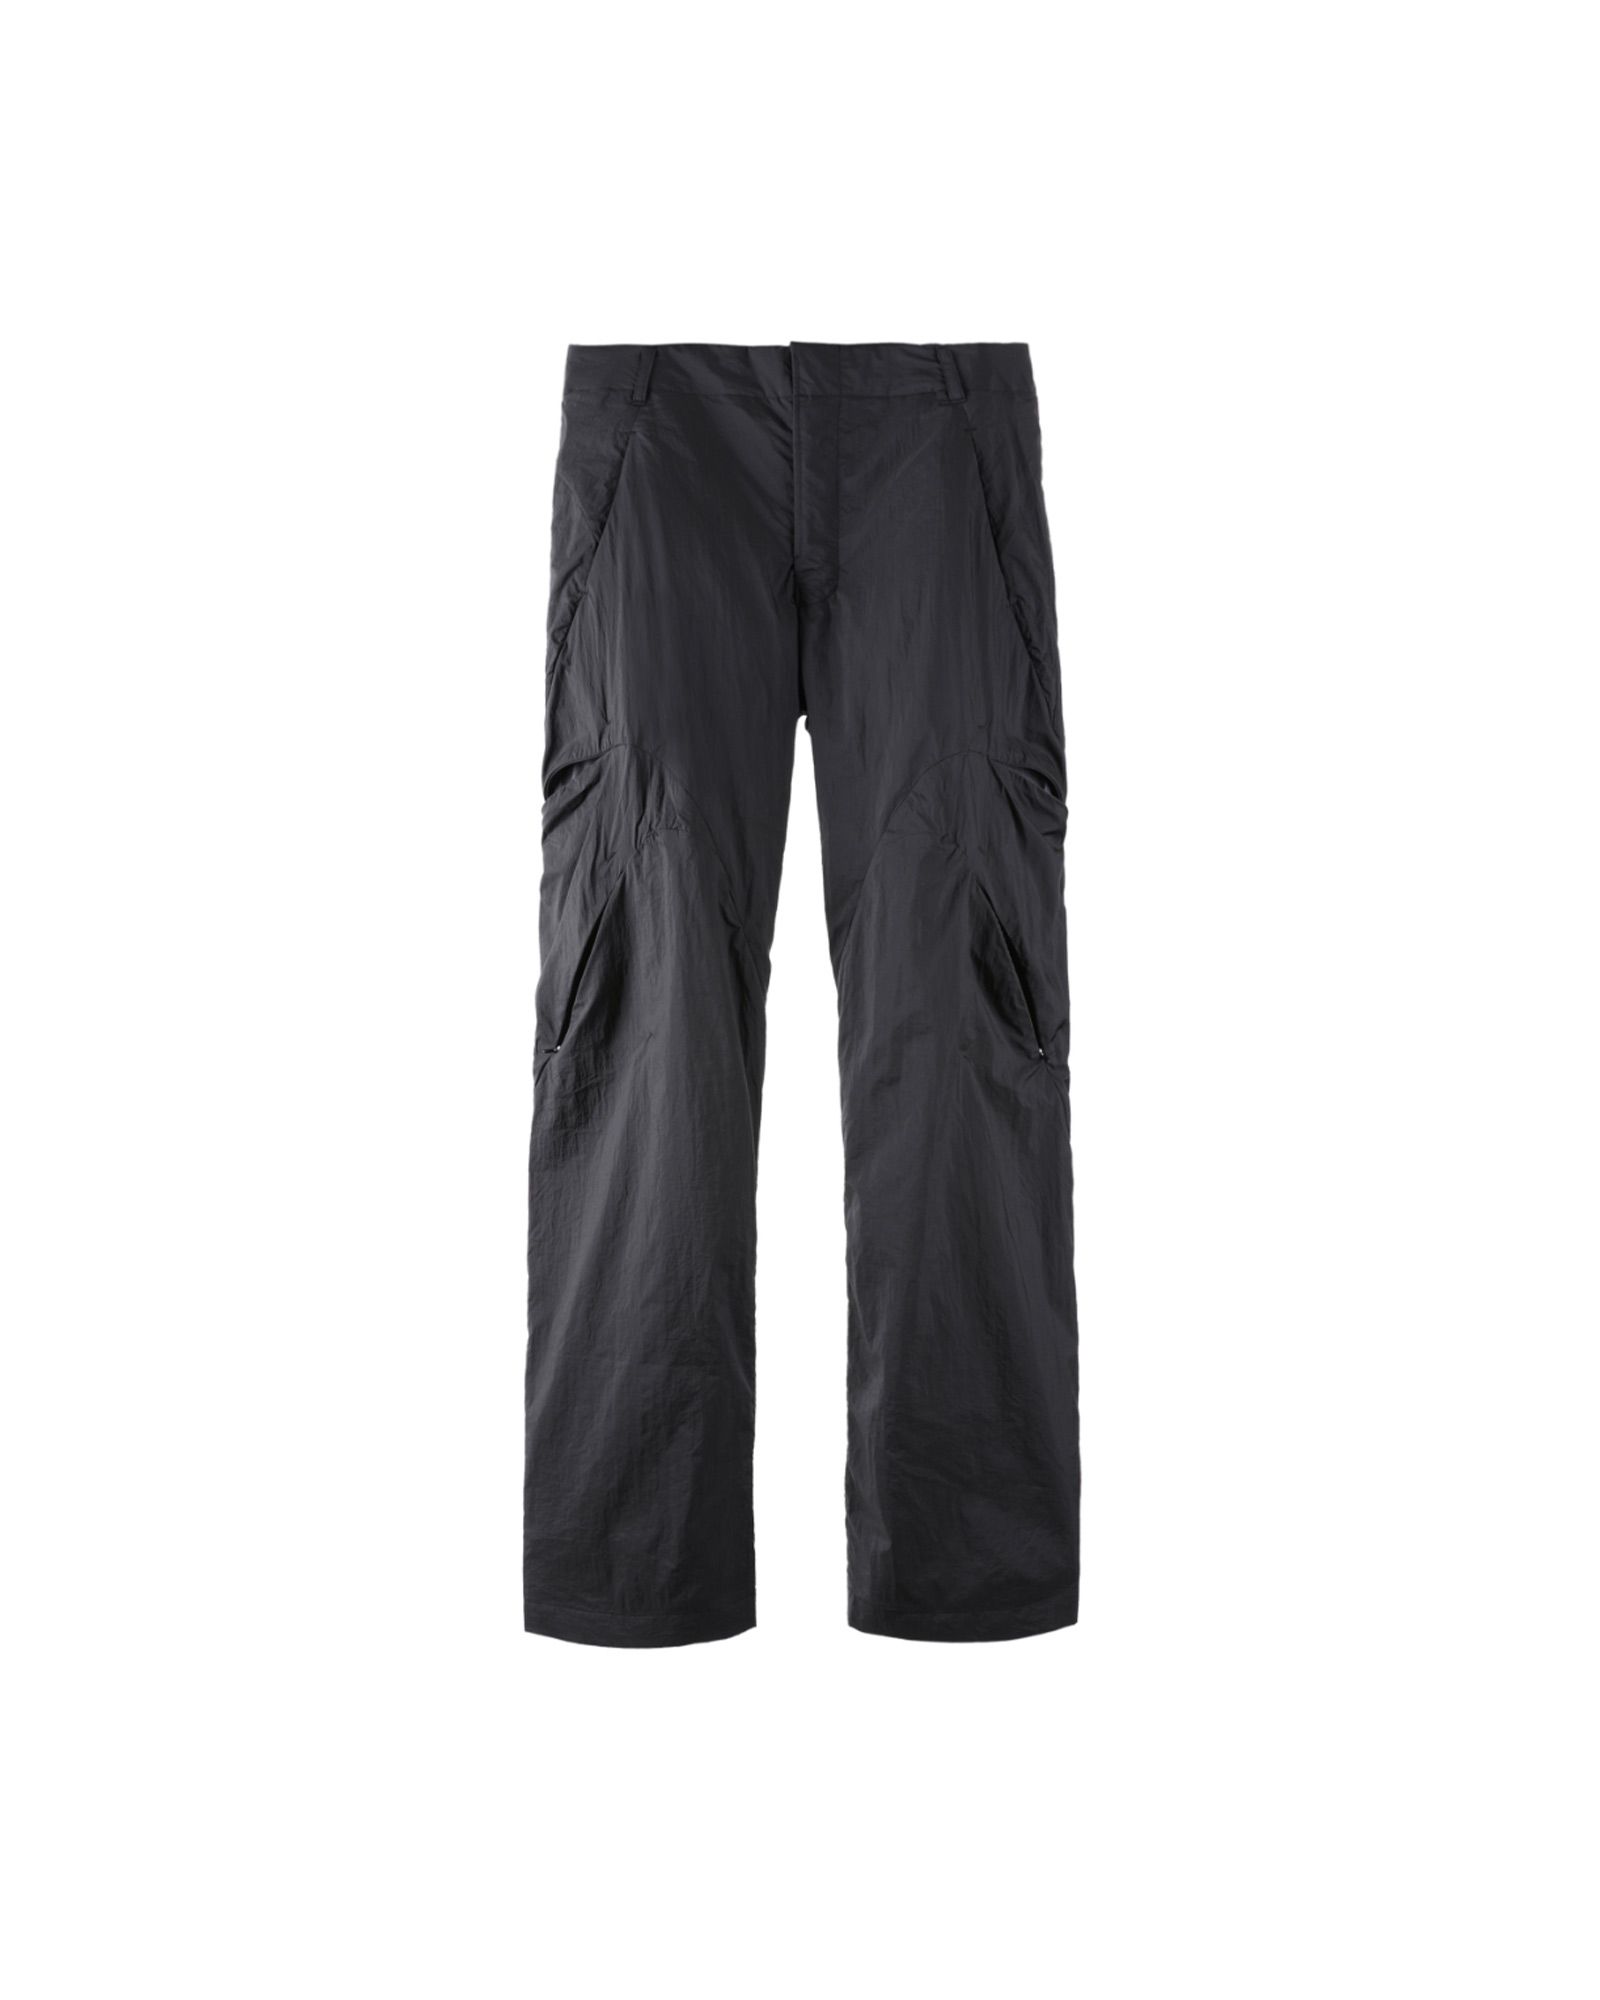 post archive faction 3.1 center trousers